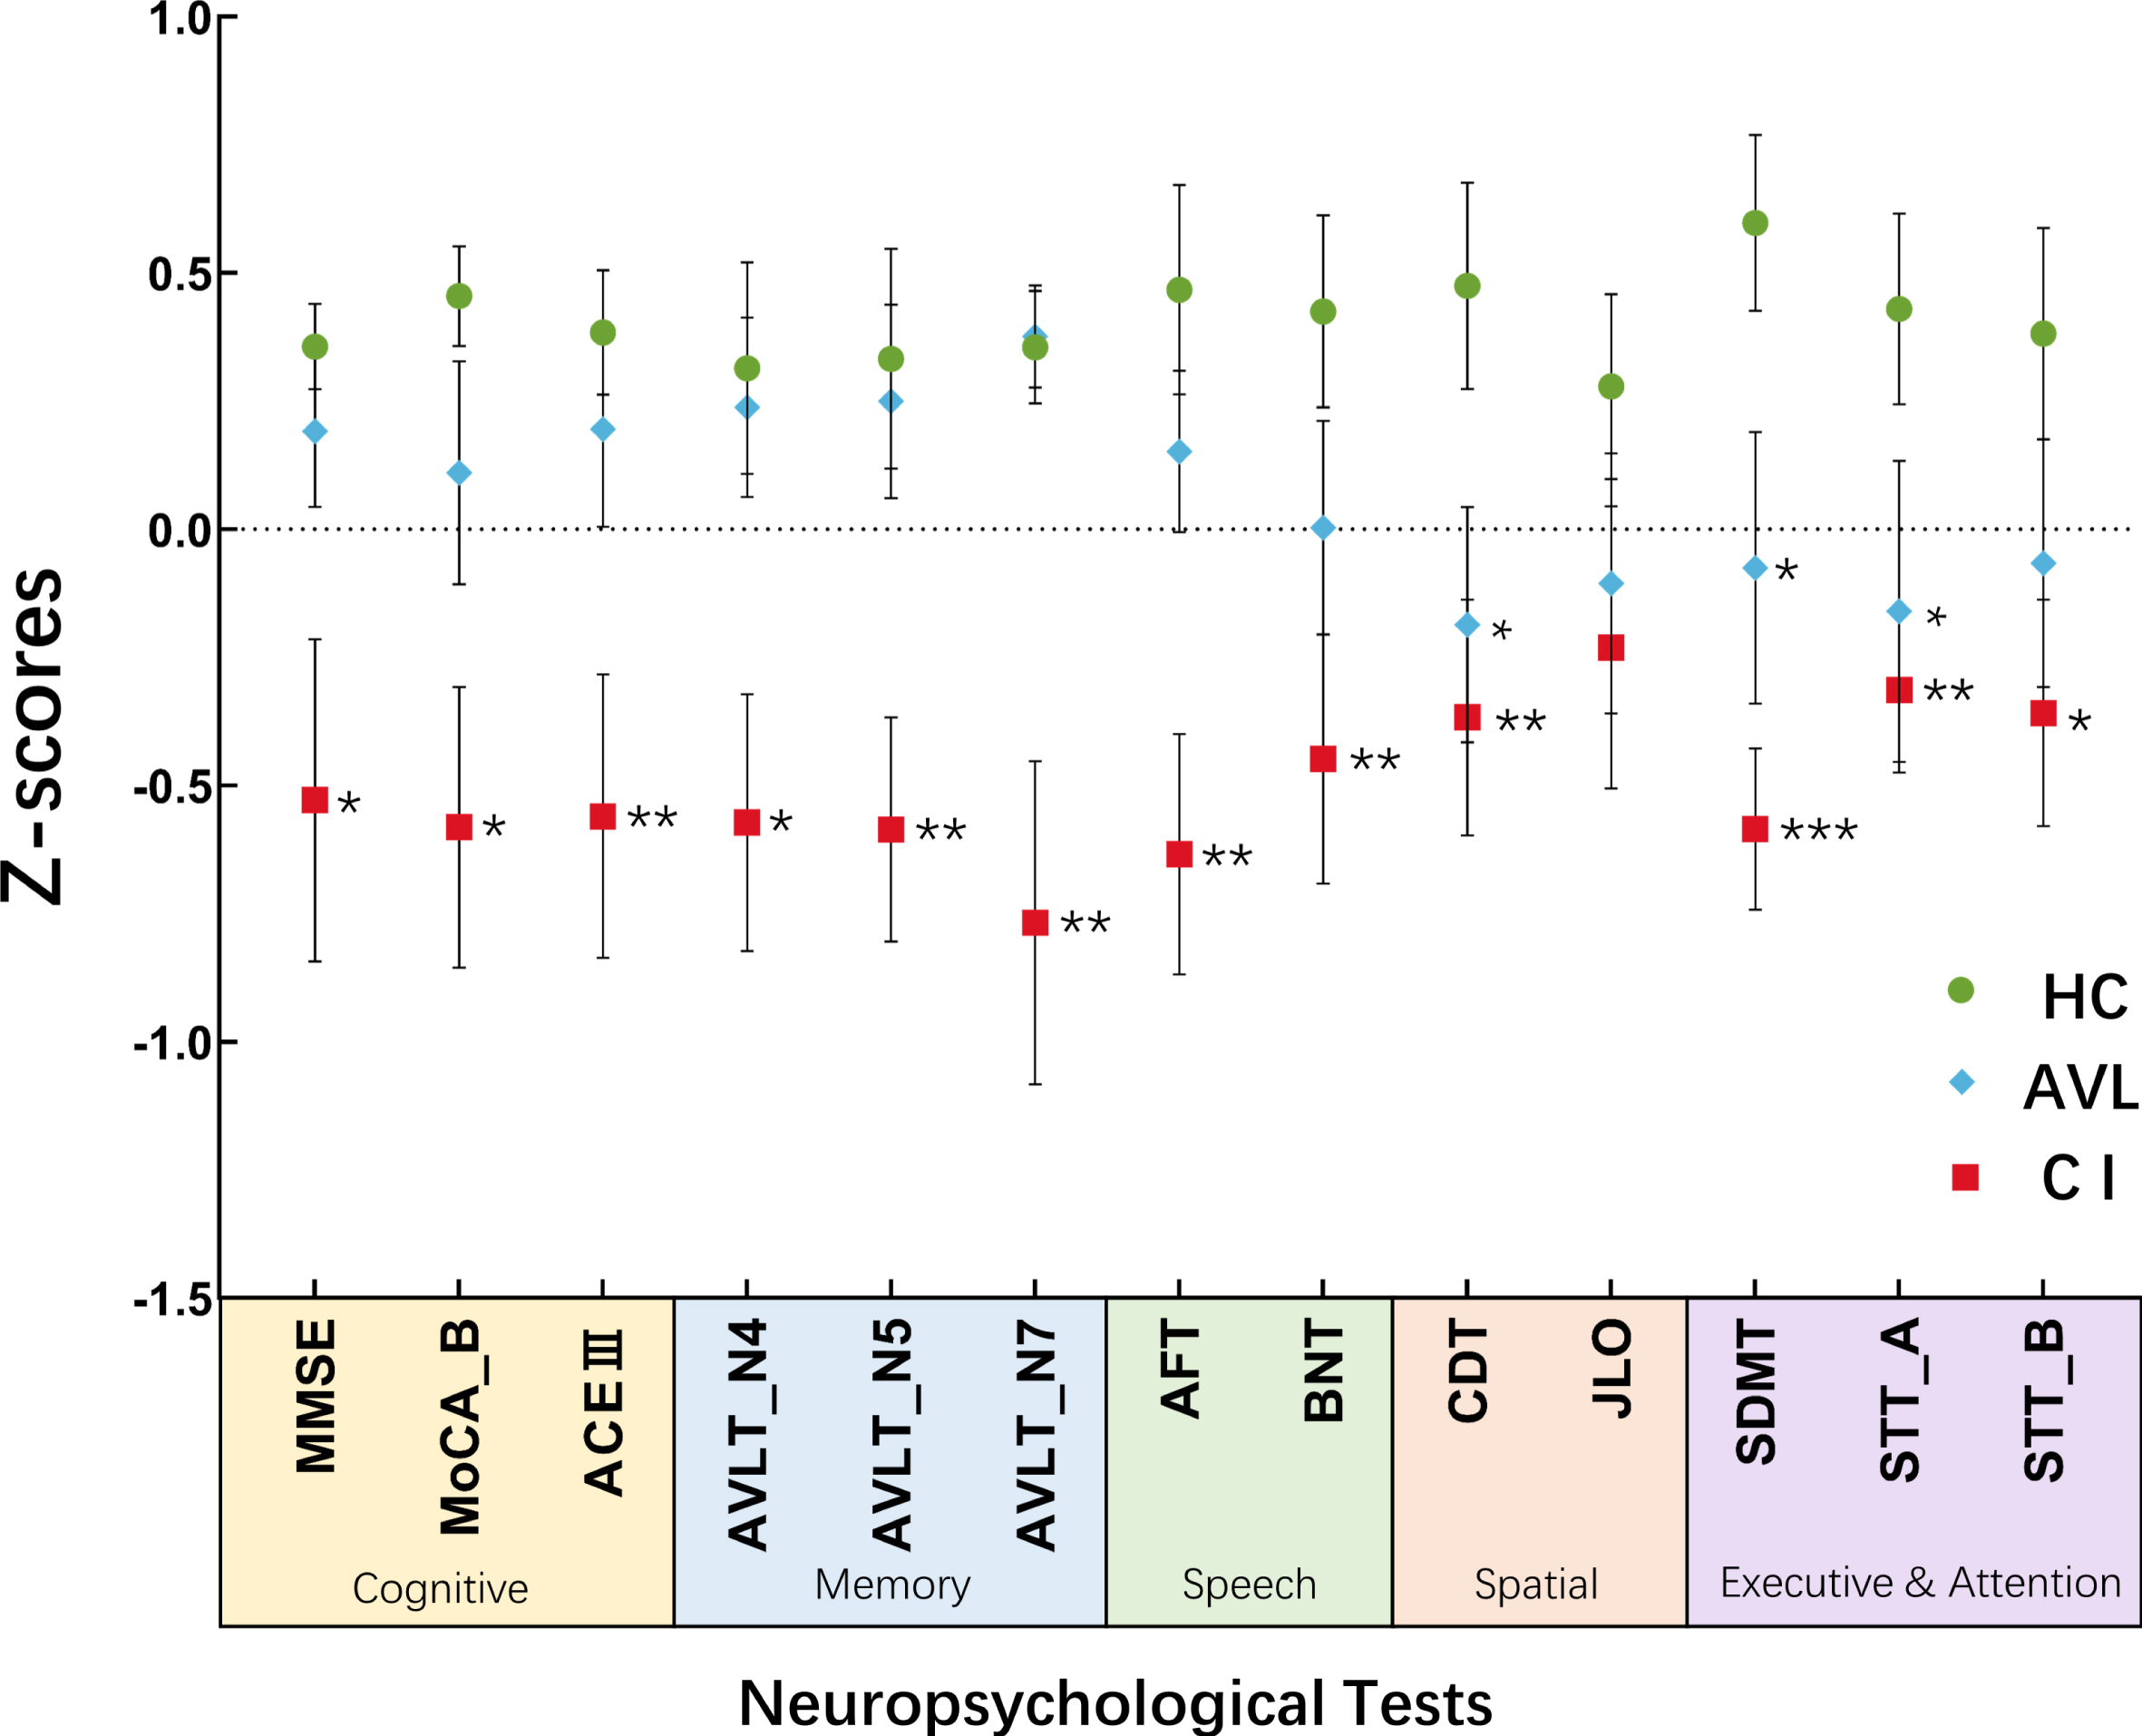 The results of neuropsychological tests were shown across three groups Significant hypofunction in visuospatial, executive and attention was observed both in CI group and AVL group demonstrated by the scores of CDT, SDMT, and STT-A. (Error bars represent the standard errors of the means). *p < 0.05; **p < 0.01; ***p < 0.001.